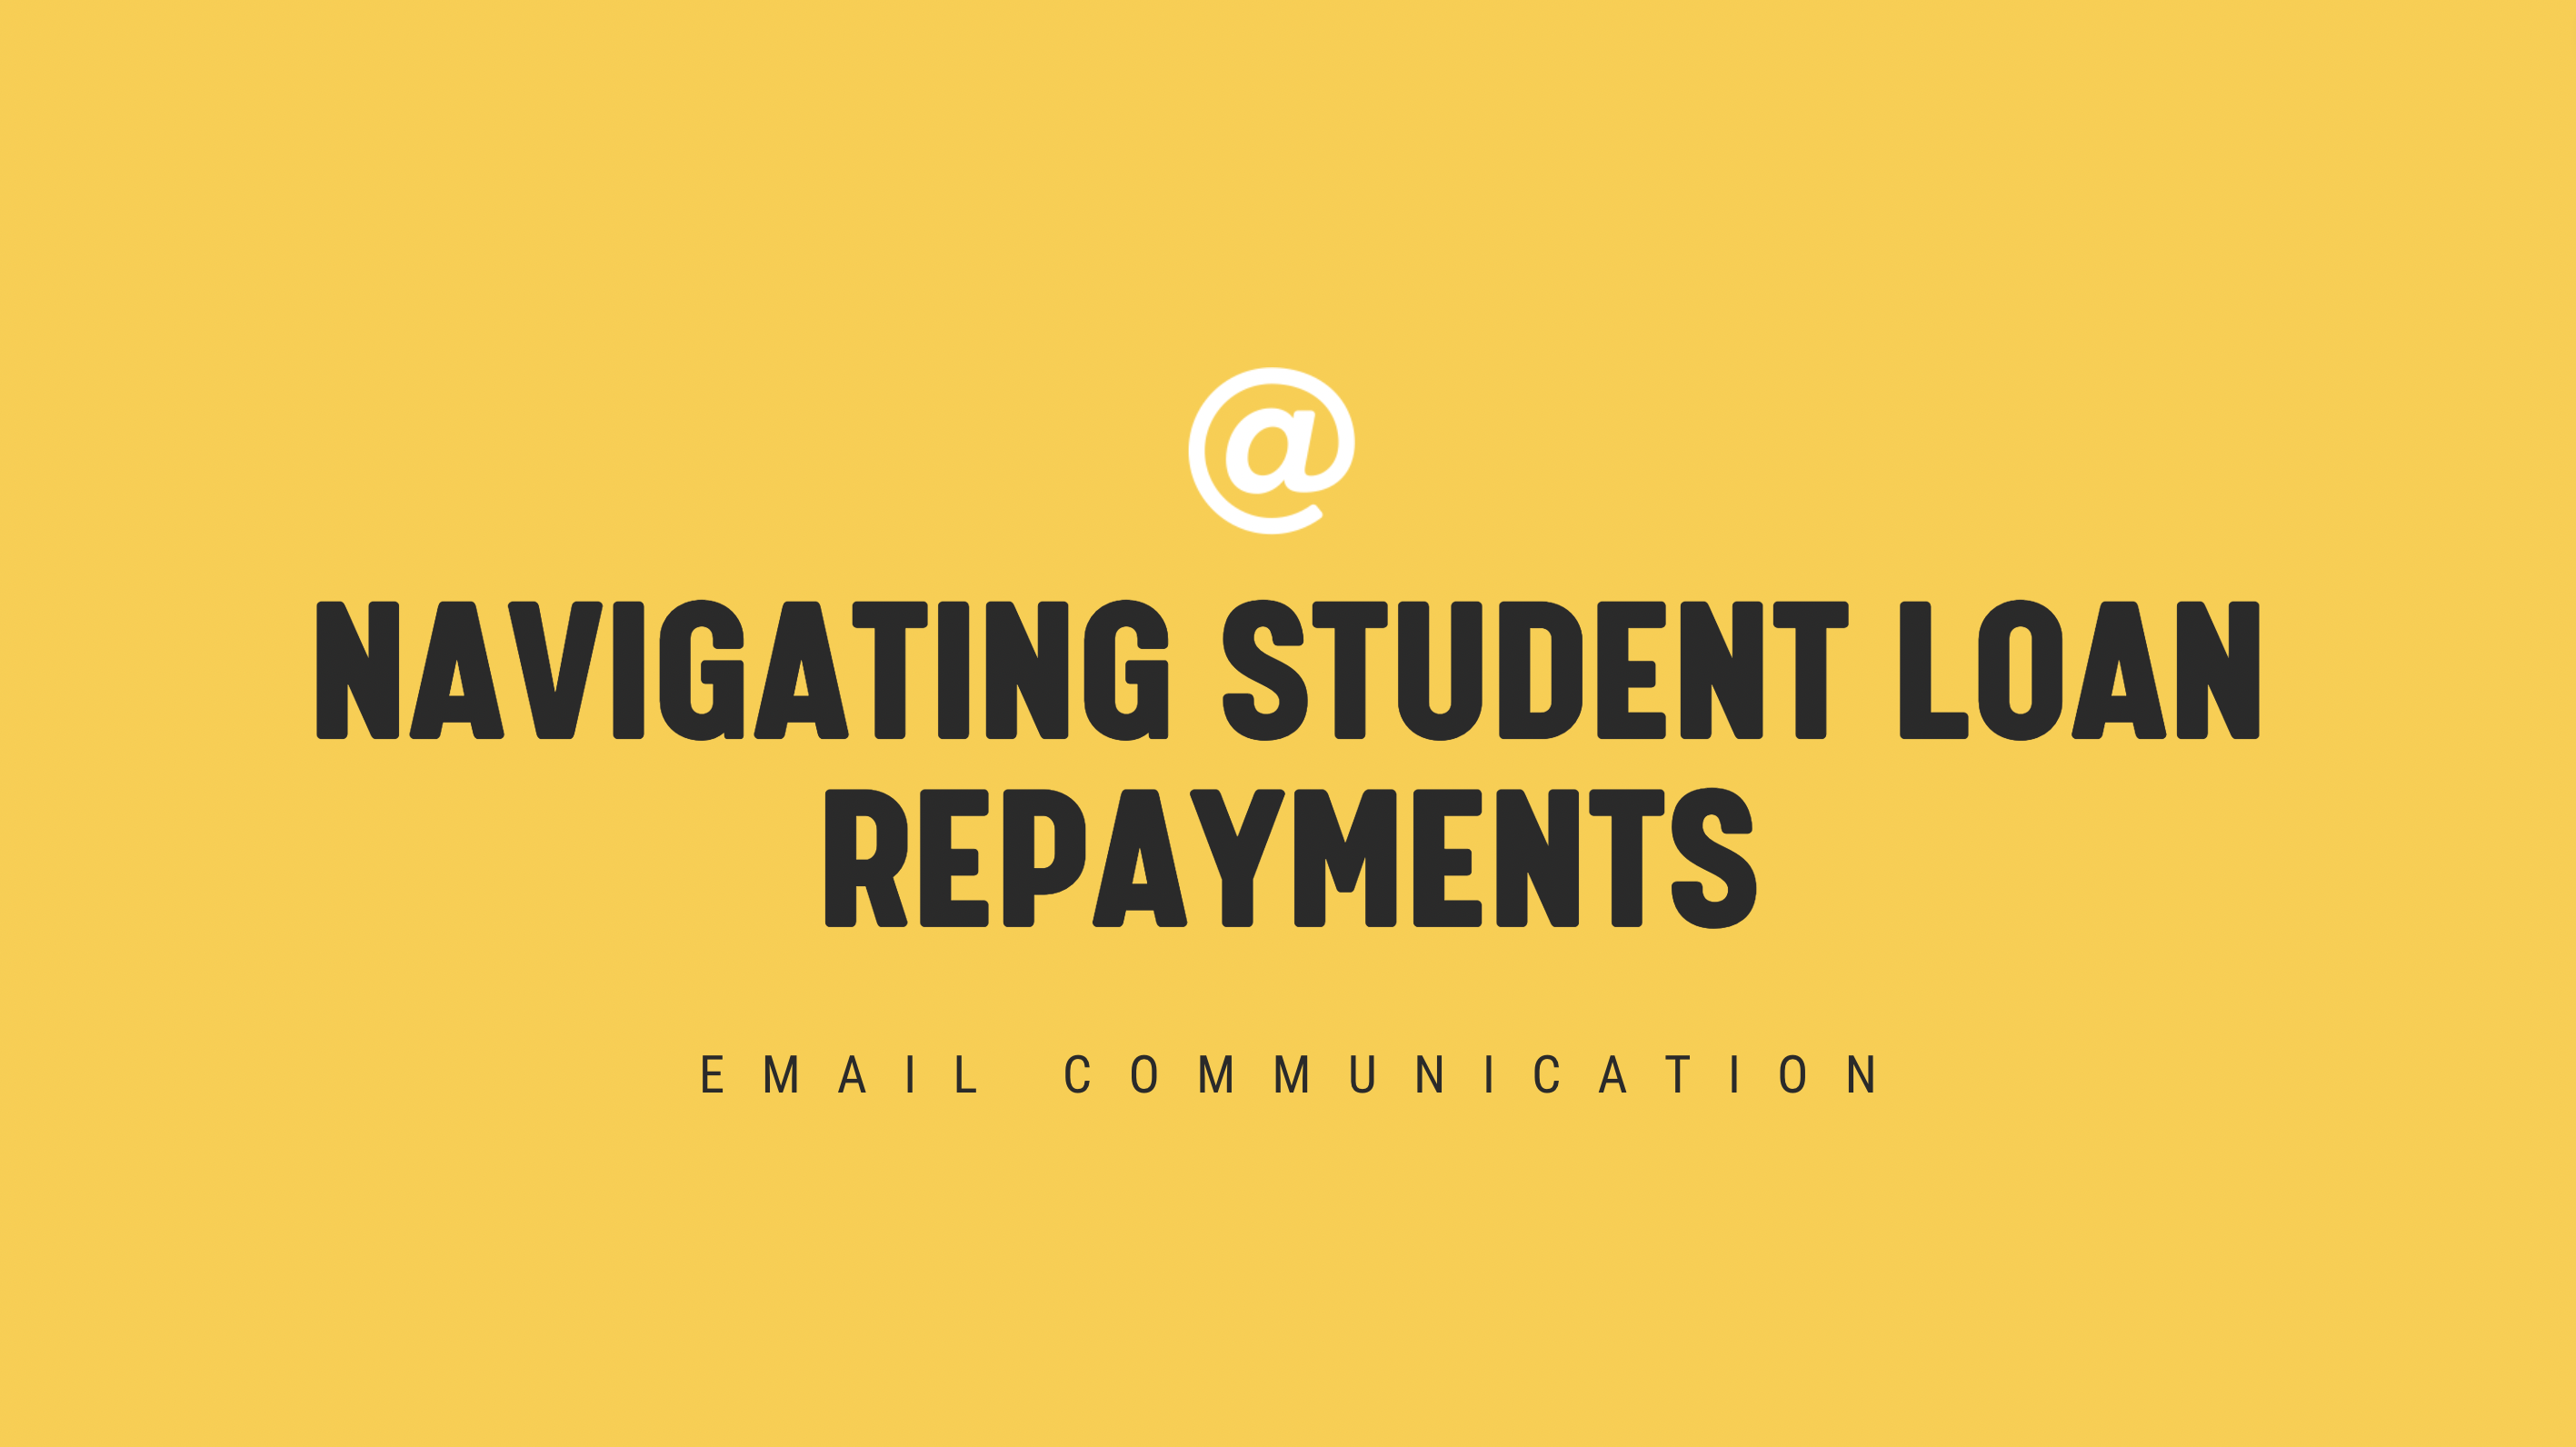 [NEW] Navigating Student Loan Repayments - Single Email